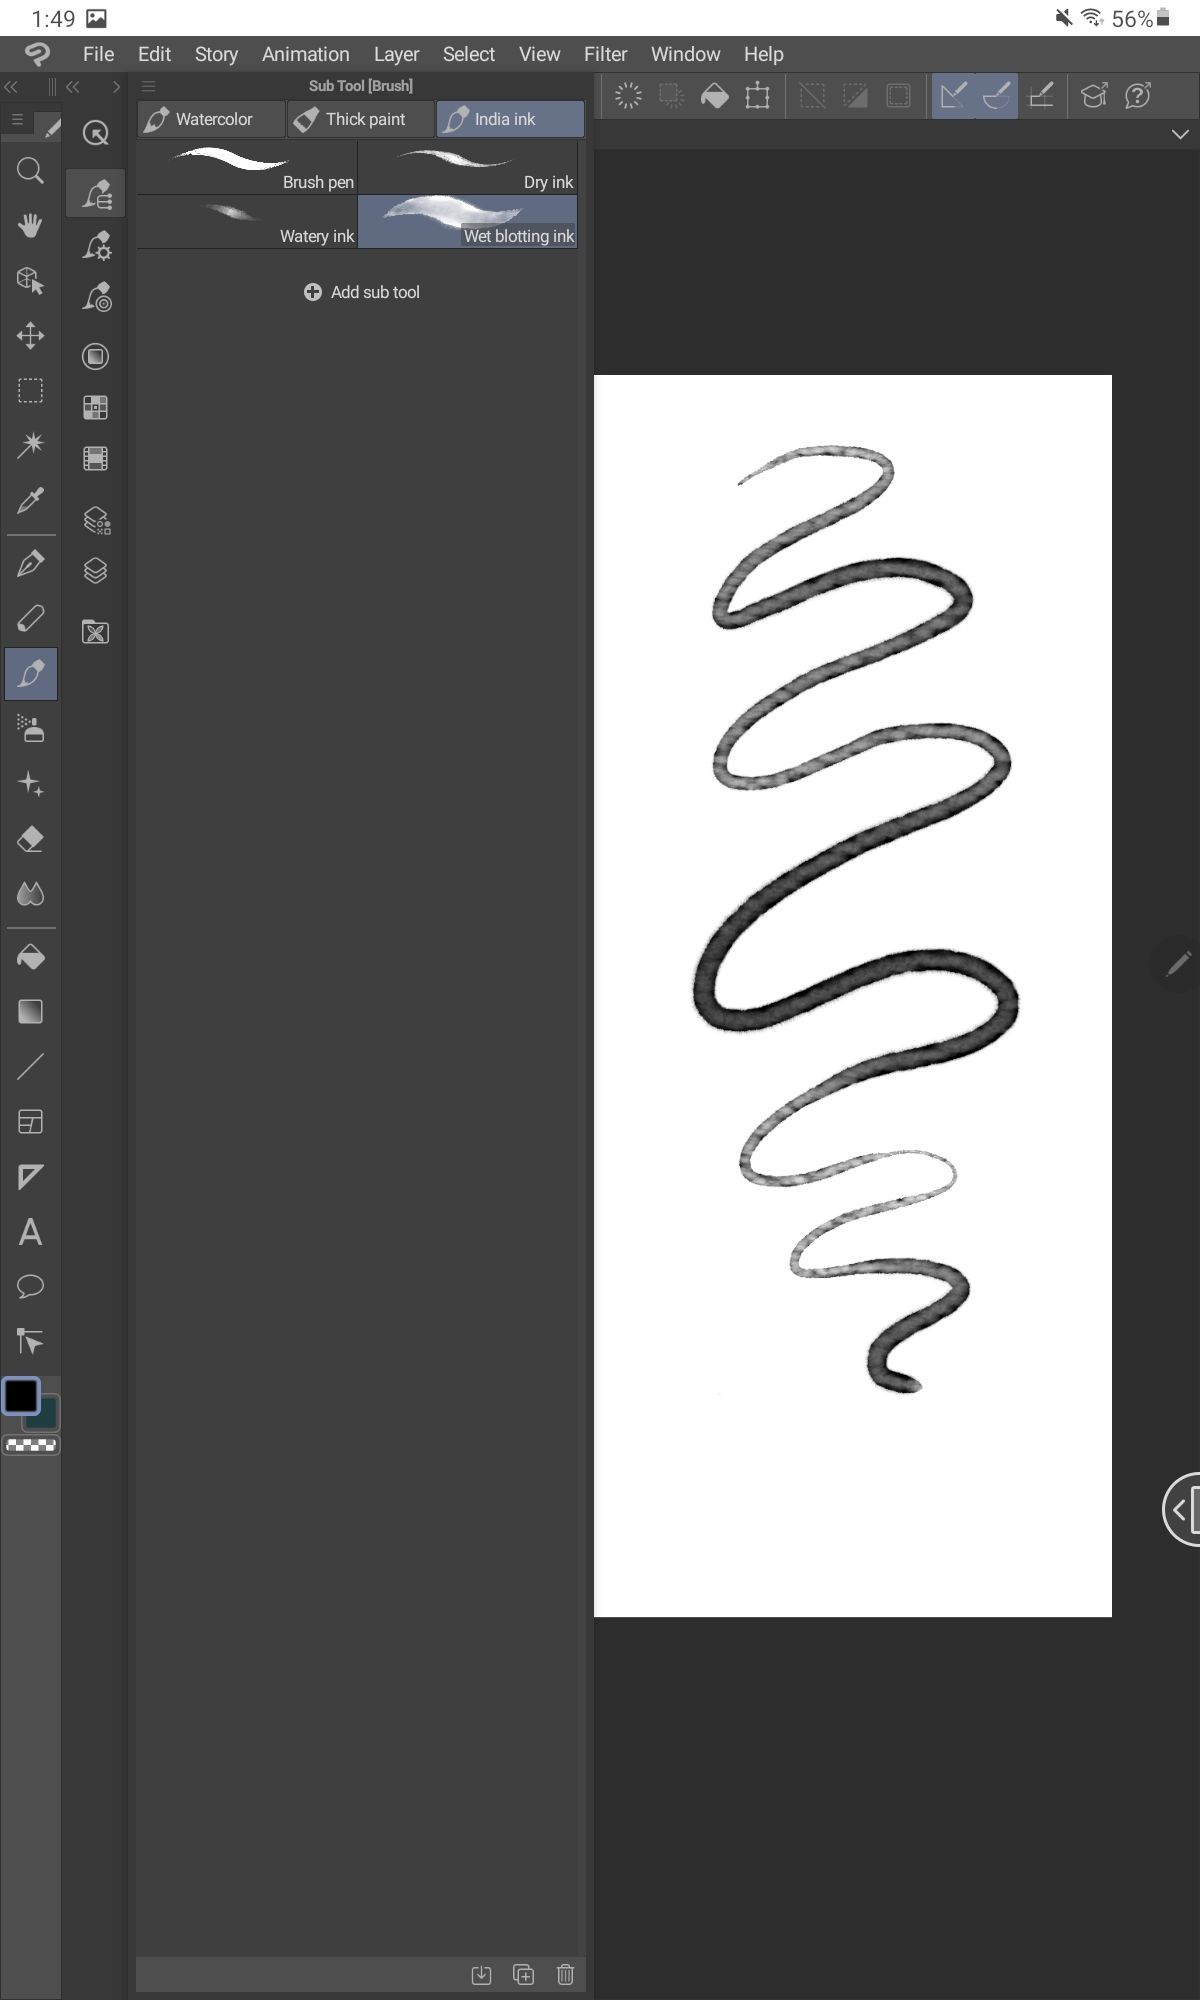 Clip Studio Paint has a range of customizable brushes